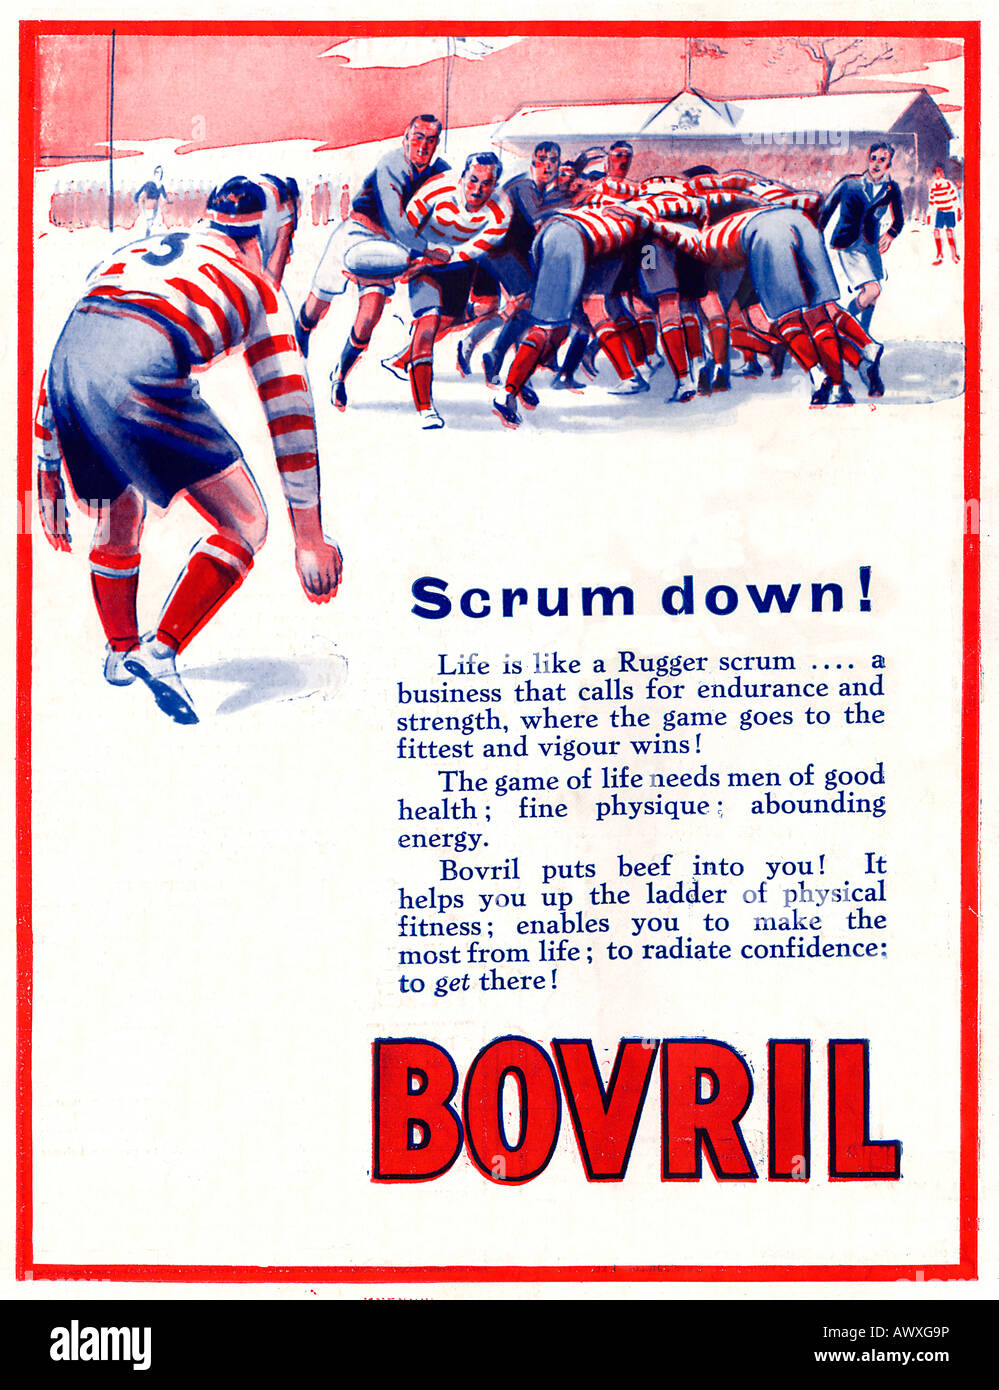 Scrum Down for Bovril 1928 advert for the beef extract beverage extoling the health and vigour supplied by the drink Stock Photo